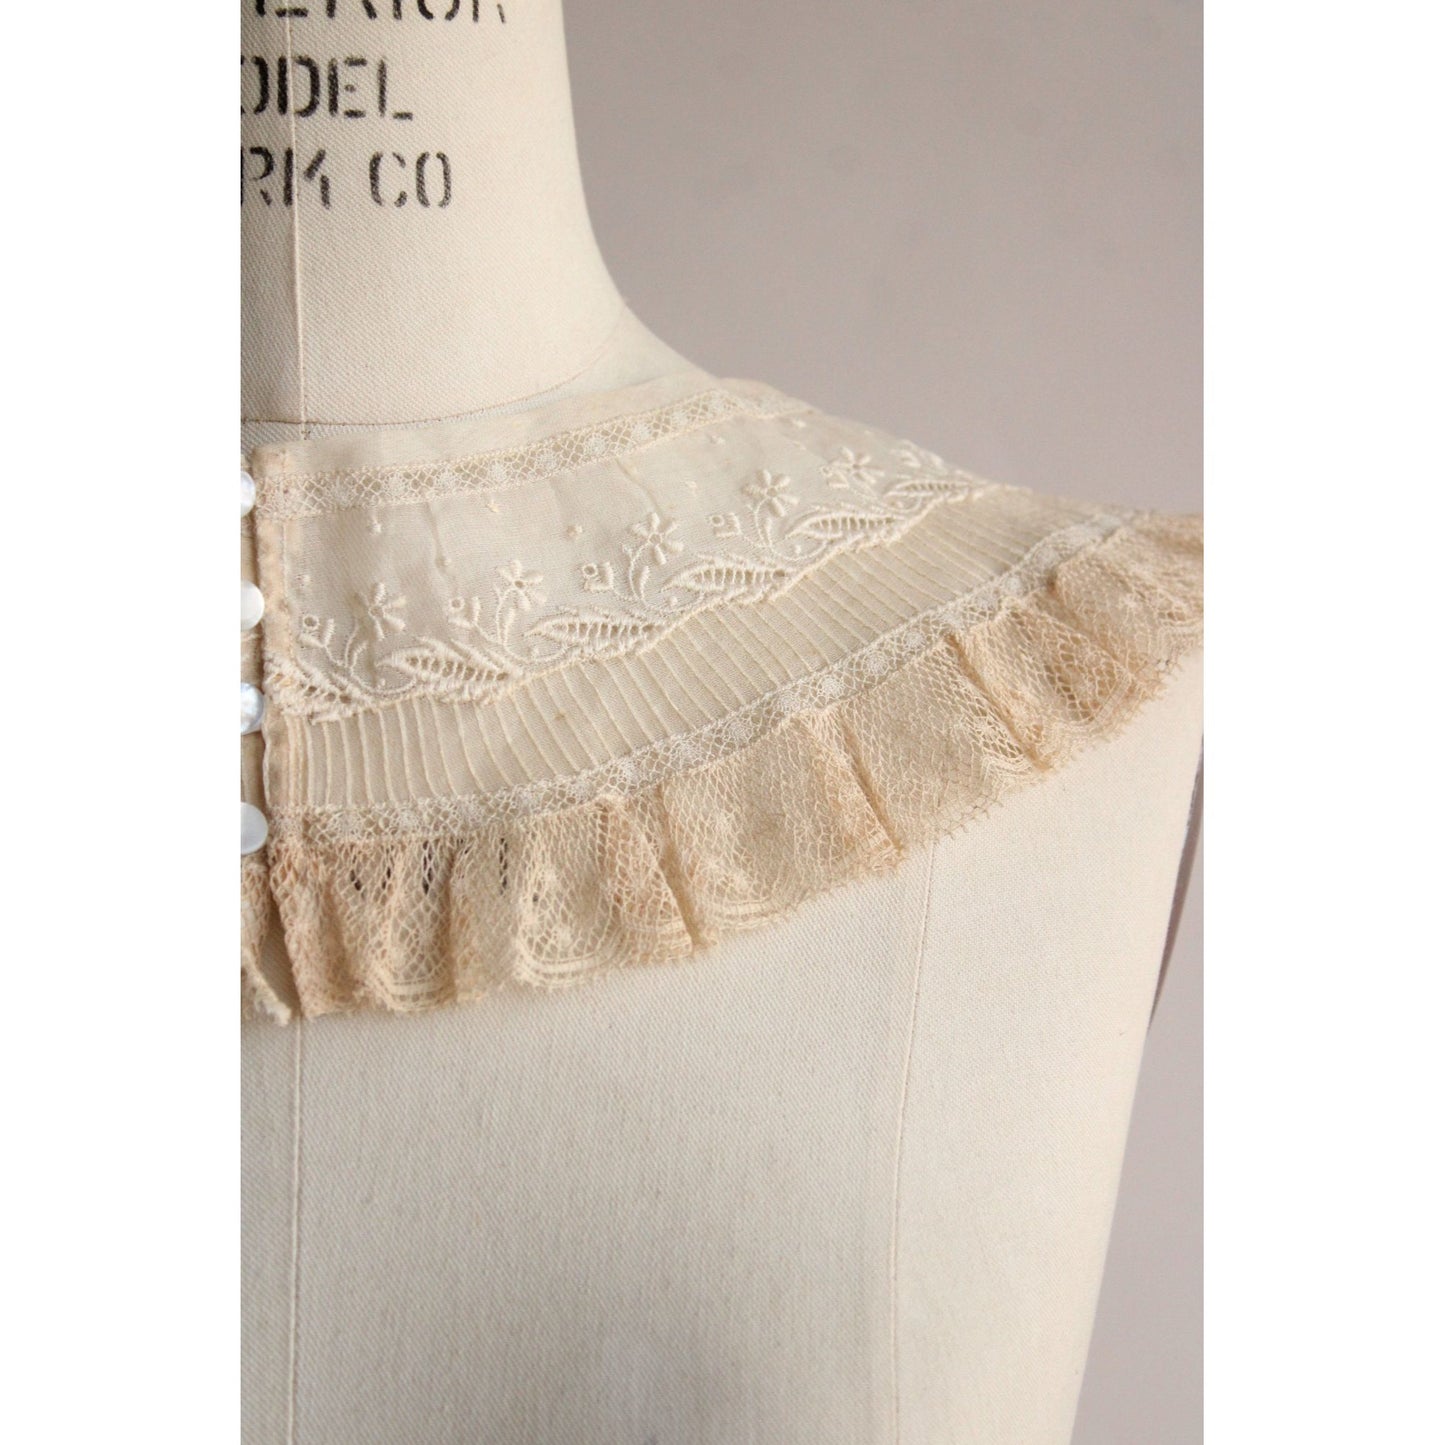 Vintage 1900s 1910s Collar in Beige Lace